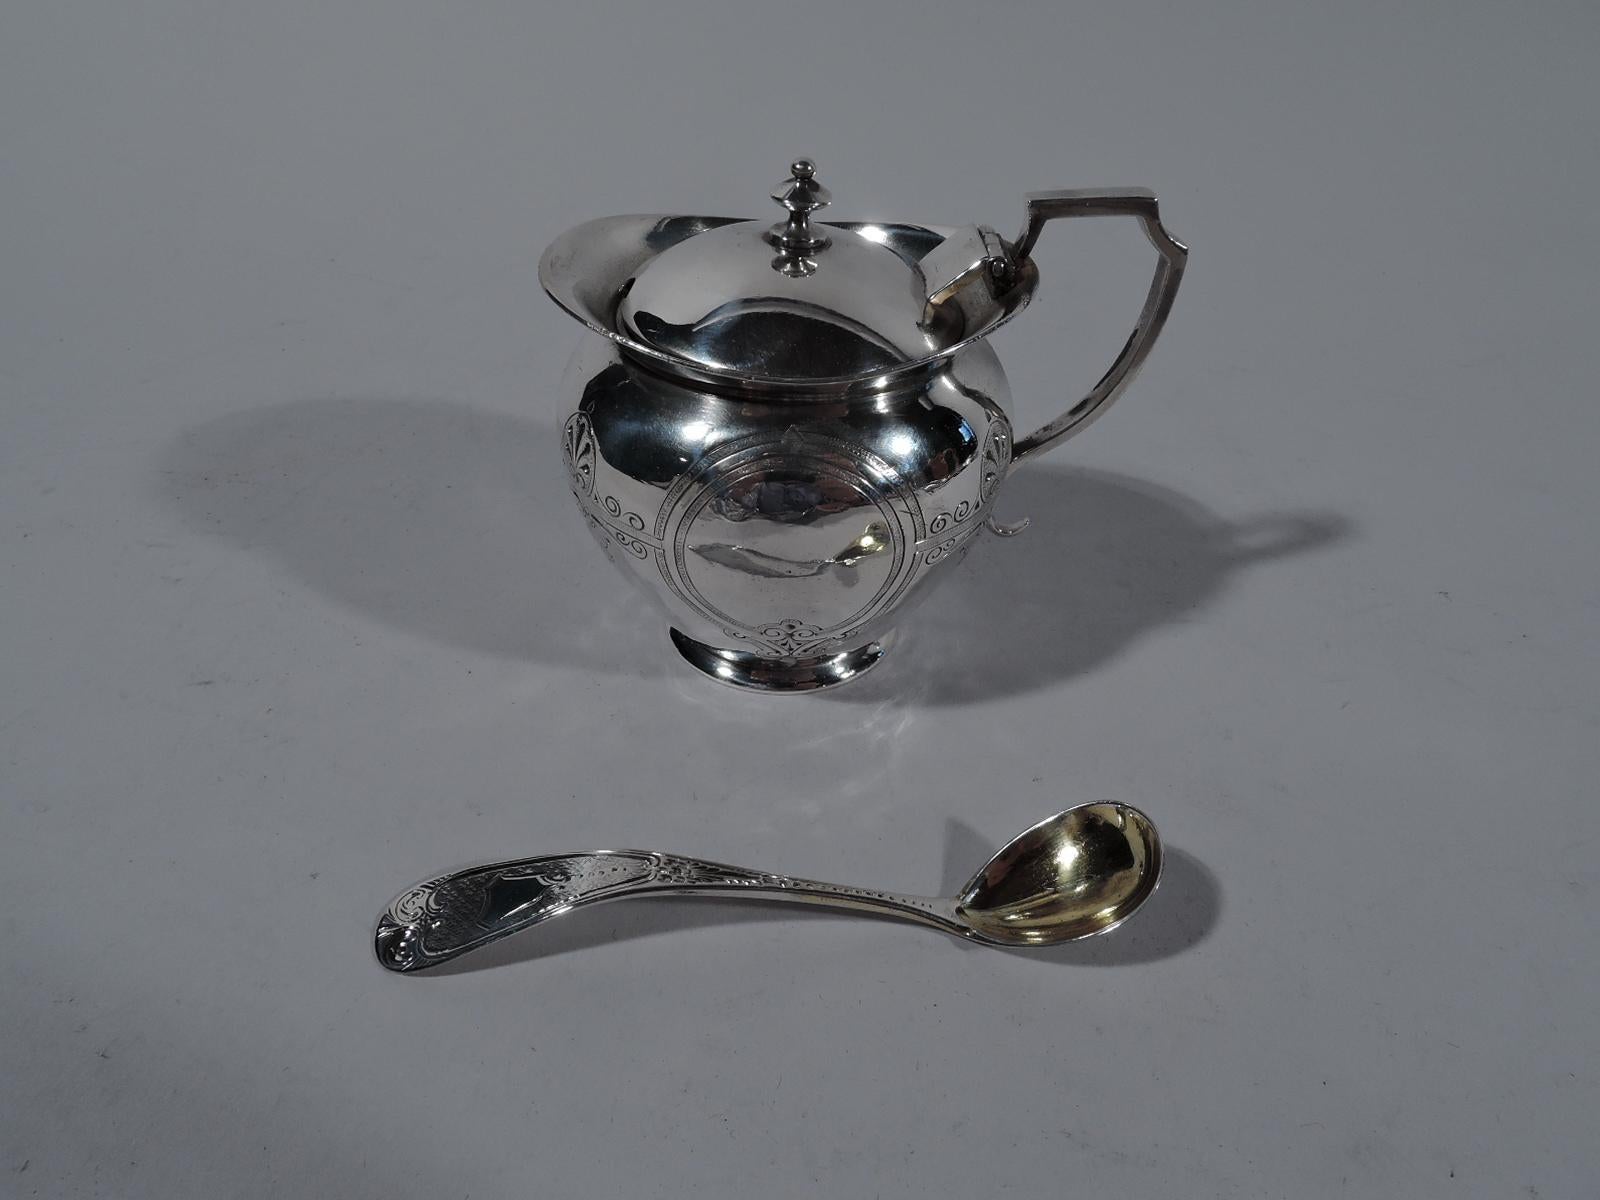 Aesthetic coin silver mustard pot with ladle, circa 1860. Pot: ovoid bowl with scroll-bracket handle and round flat foot. Flared rim and hinged and domed cover. Ladle: Curved and tapering shaft with oval gilt-washed bowl. Chased and engraved